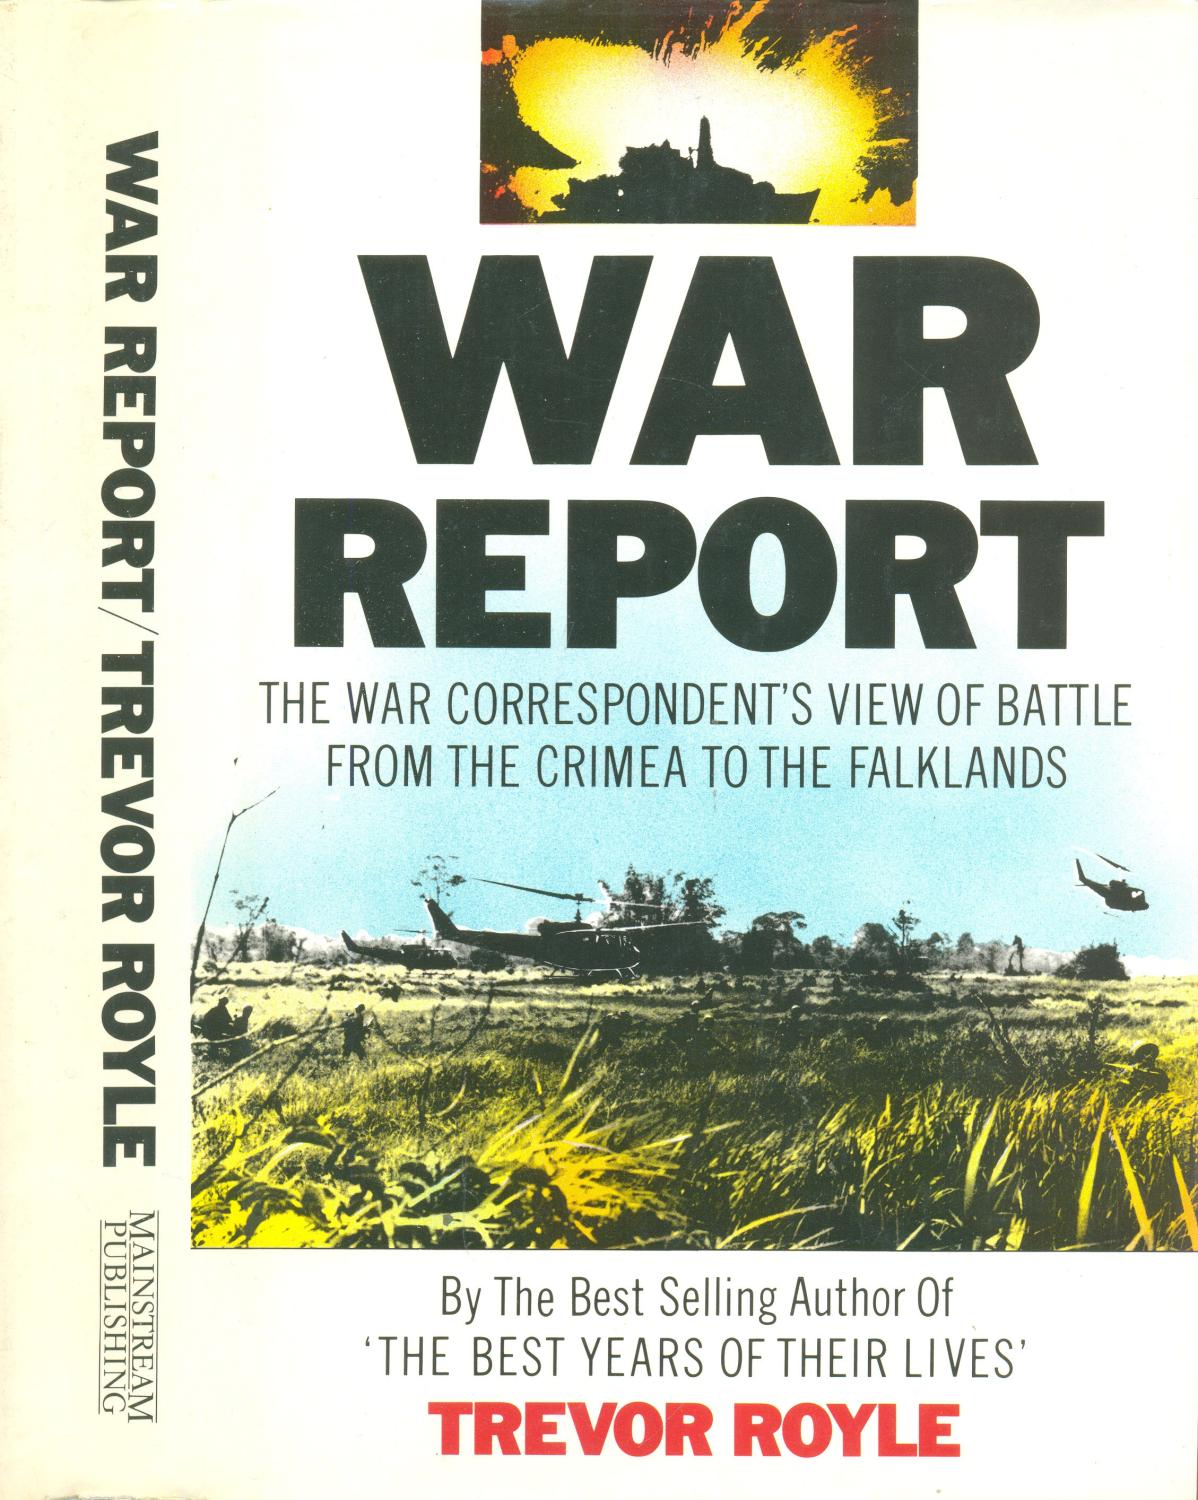 War Report: The War Correspondent's View of Battle from Crimea to the Falklands